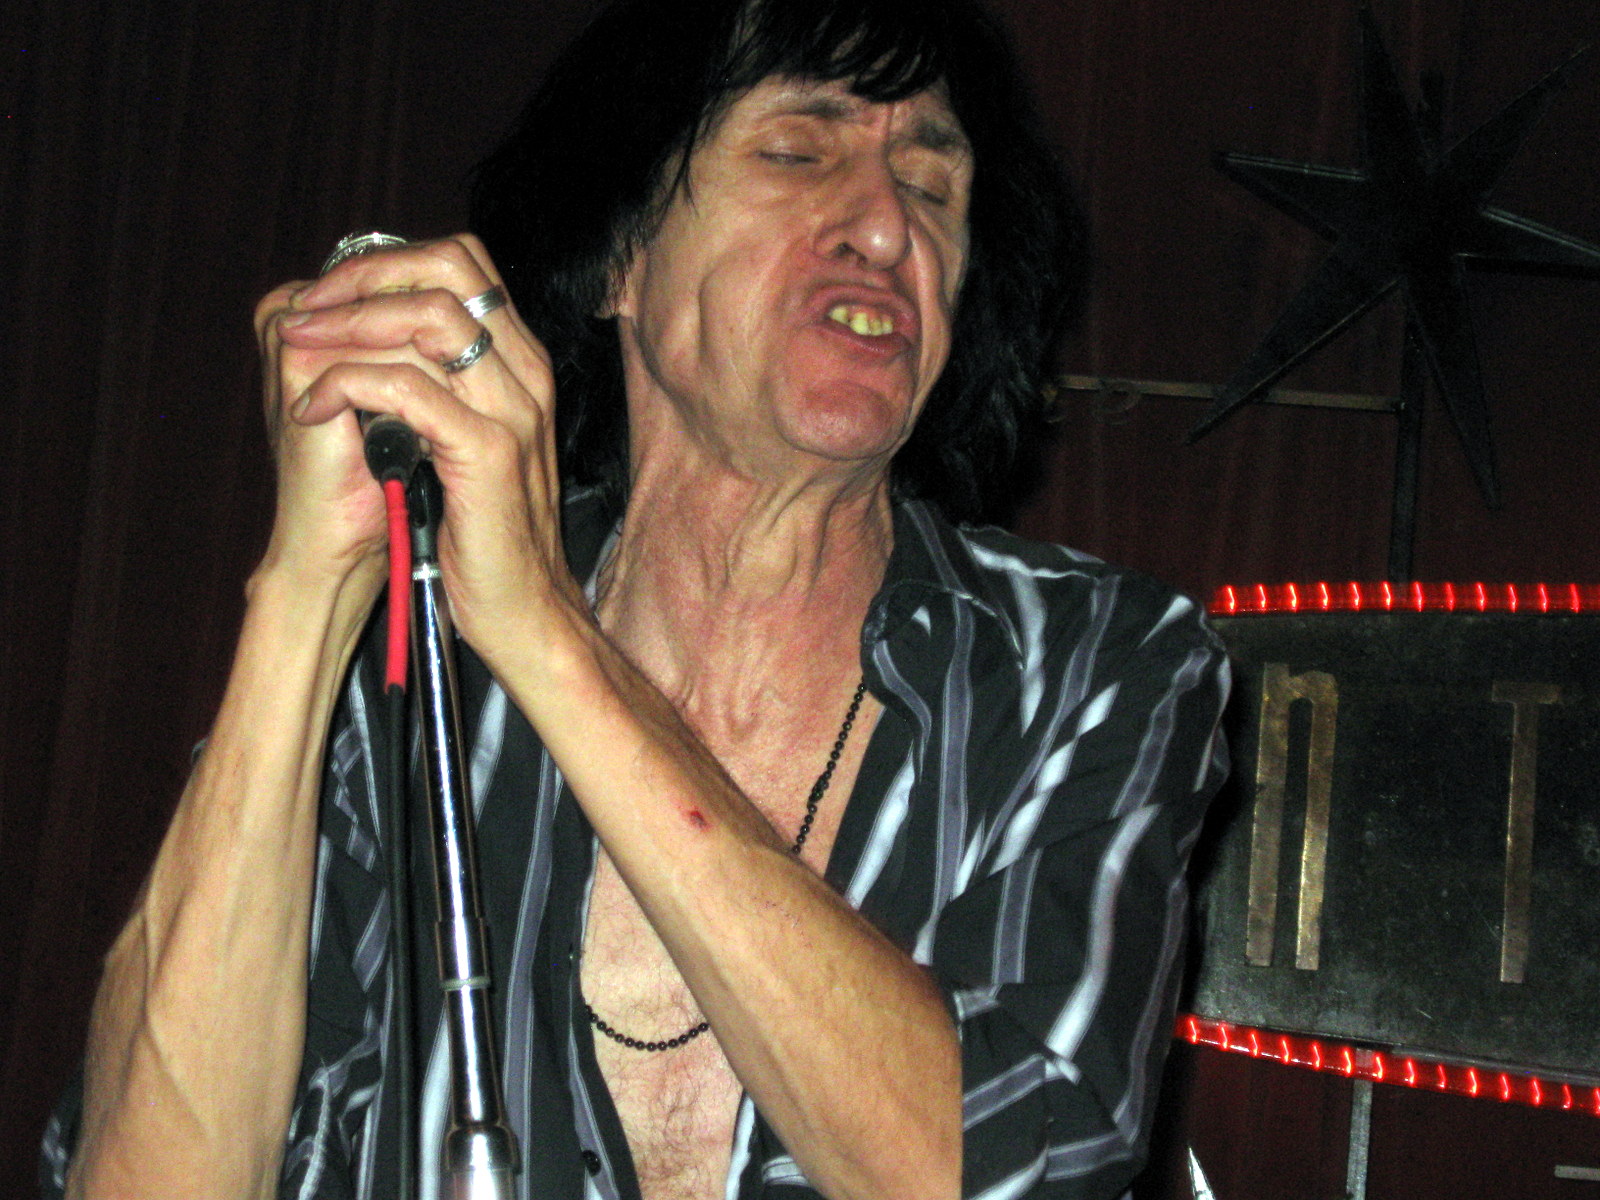 a person on stage with his mouth open